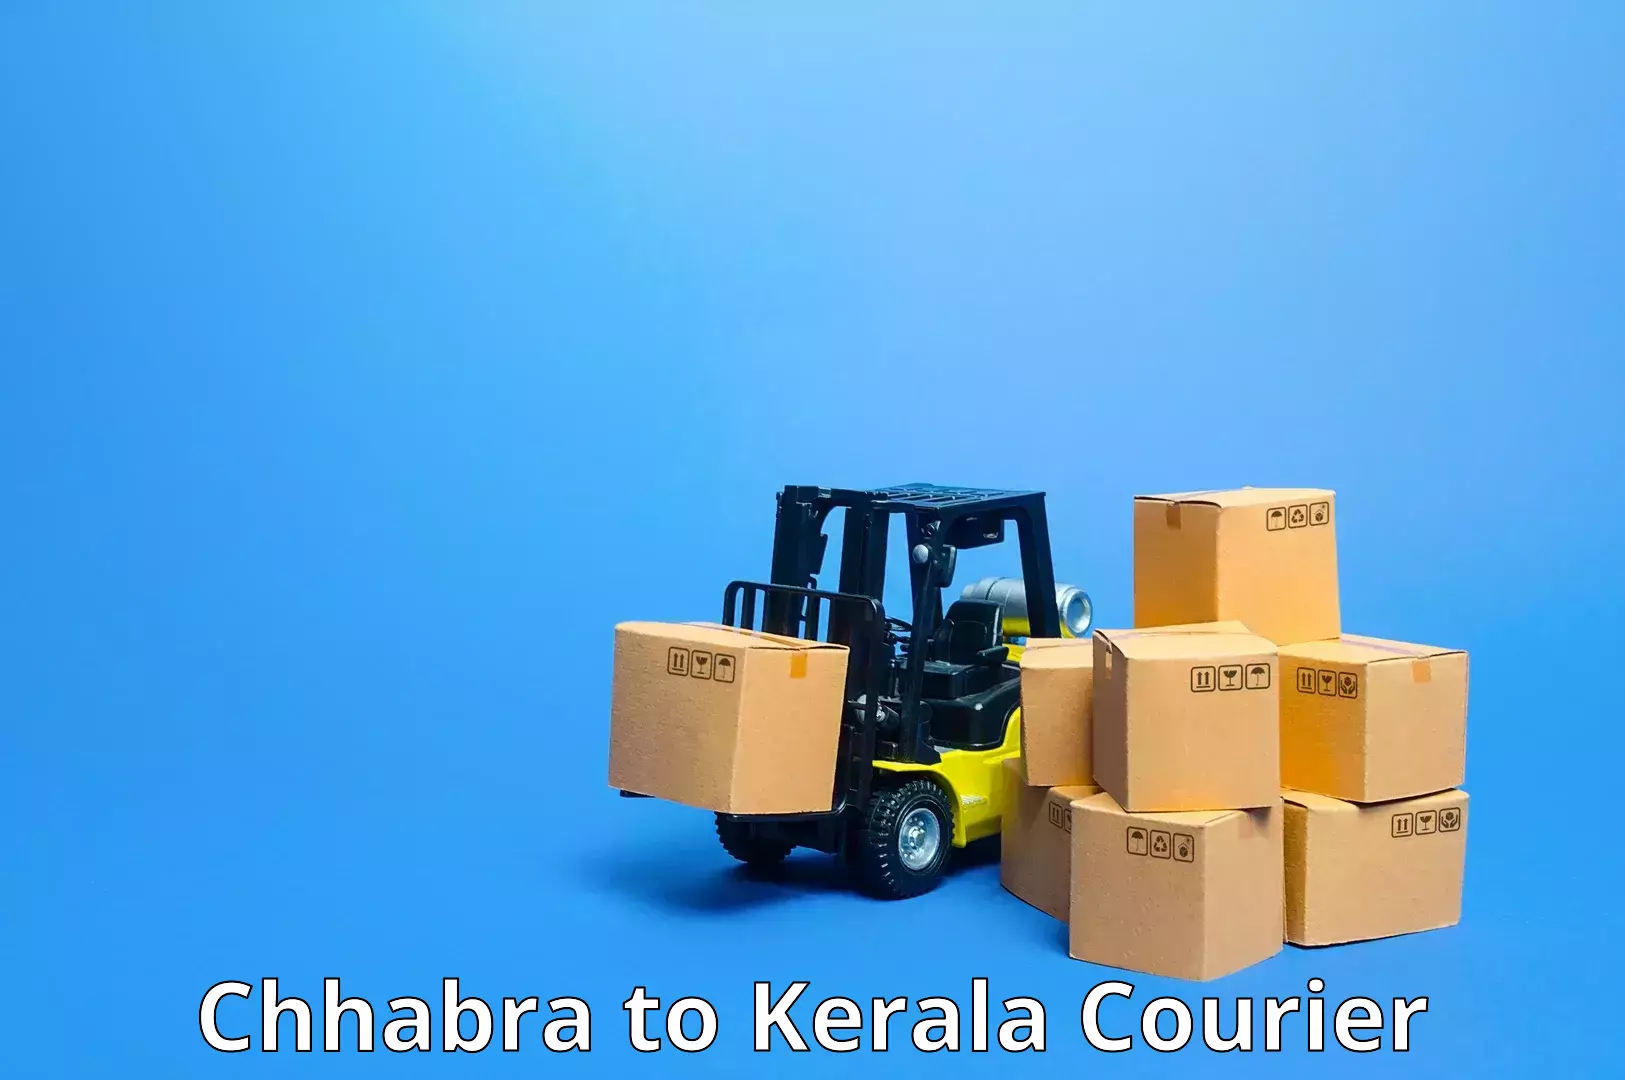 Courier service booking Chhabra to Ernakulam